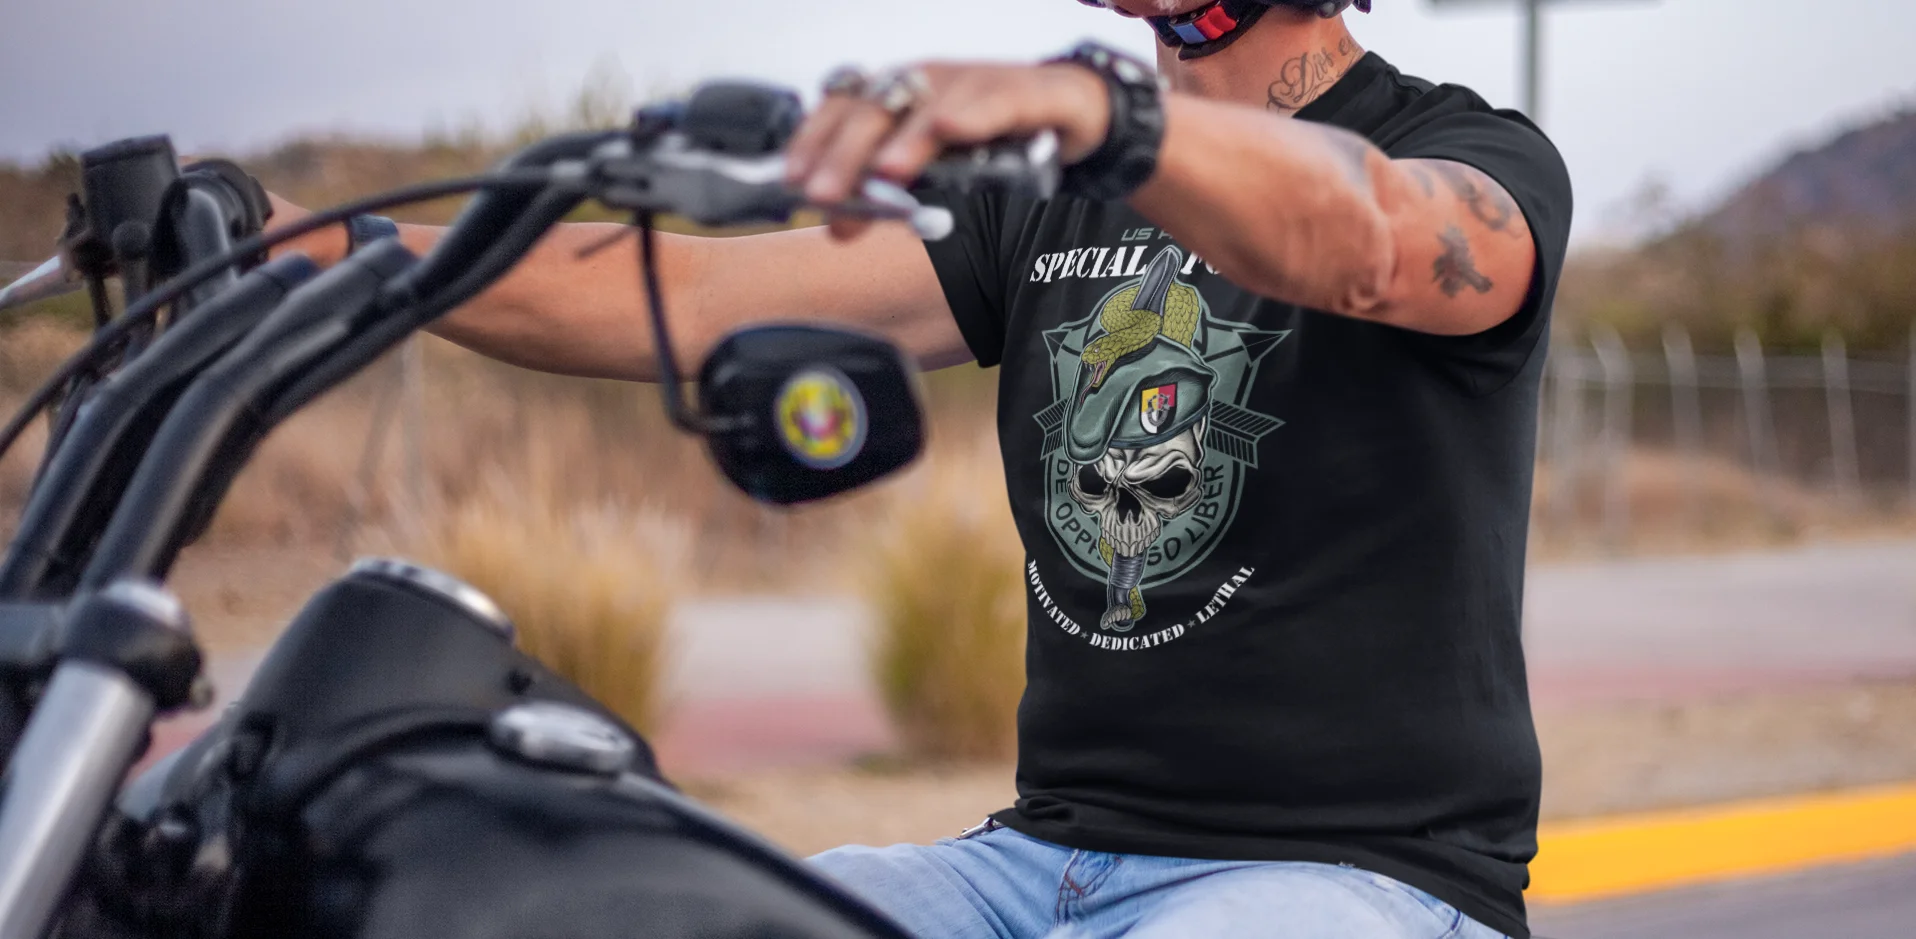 U.S. Army Special Forces soldier riding motorcycle in 3rd SFG t-shirt